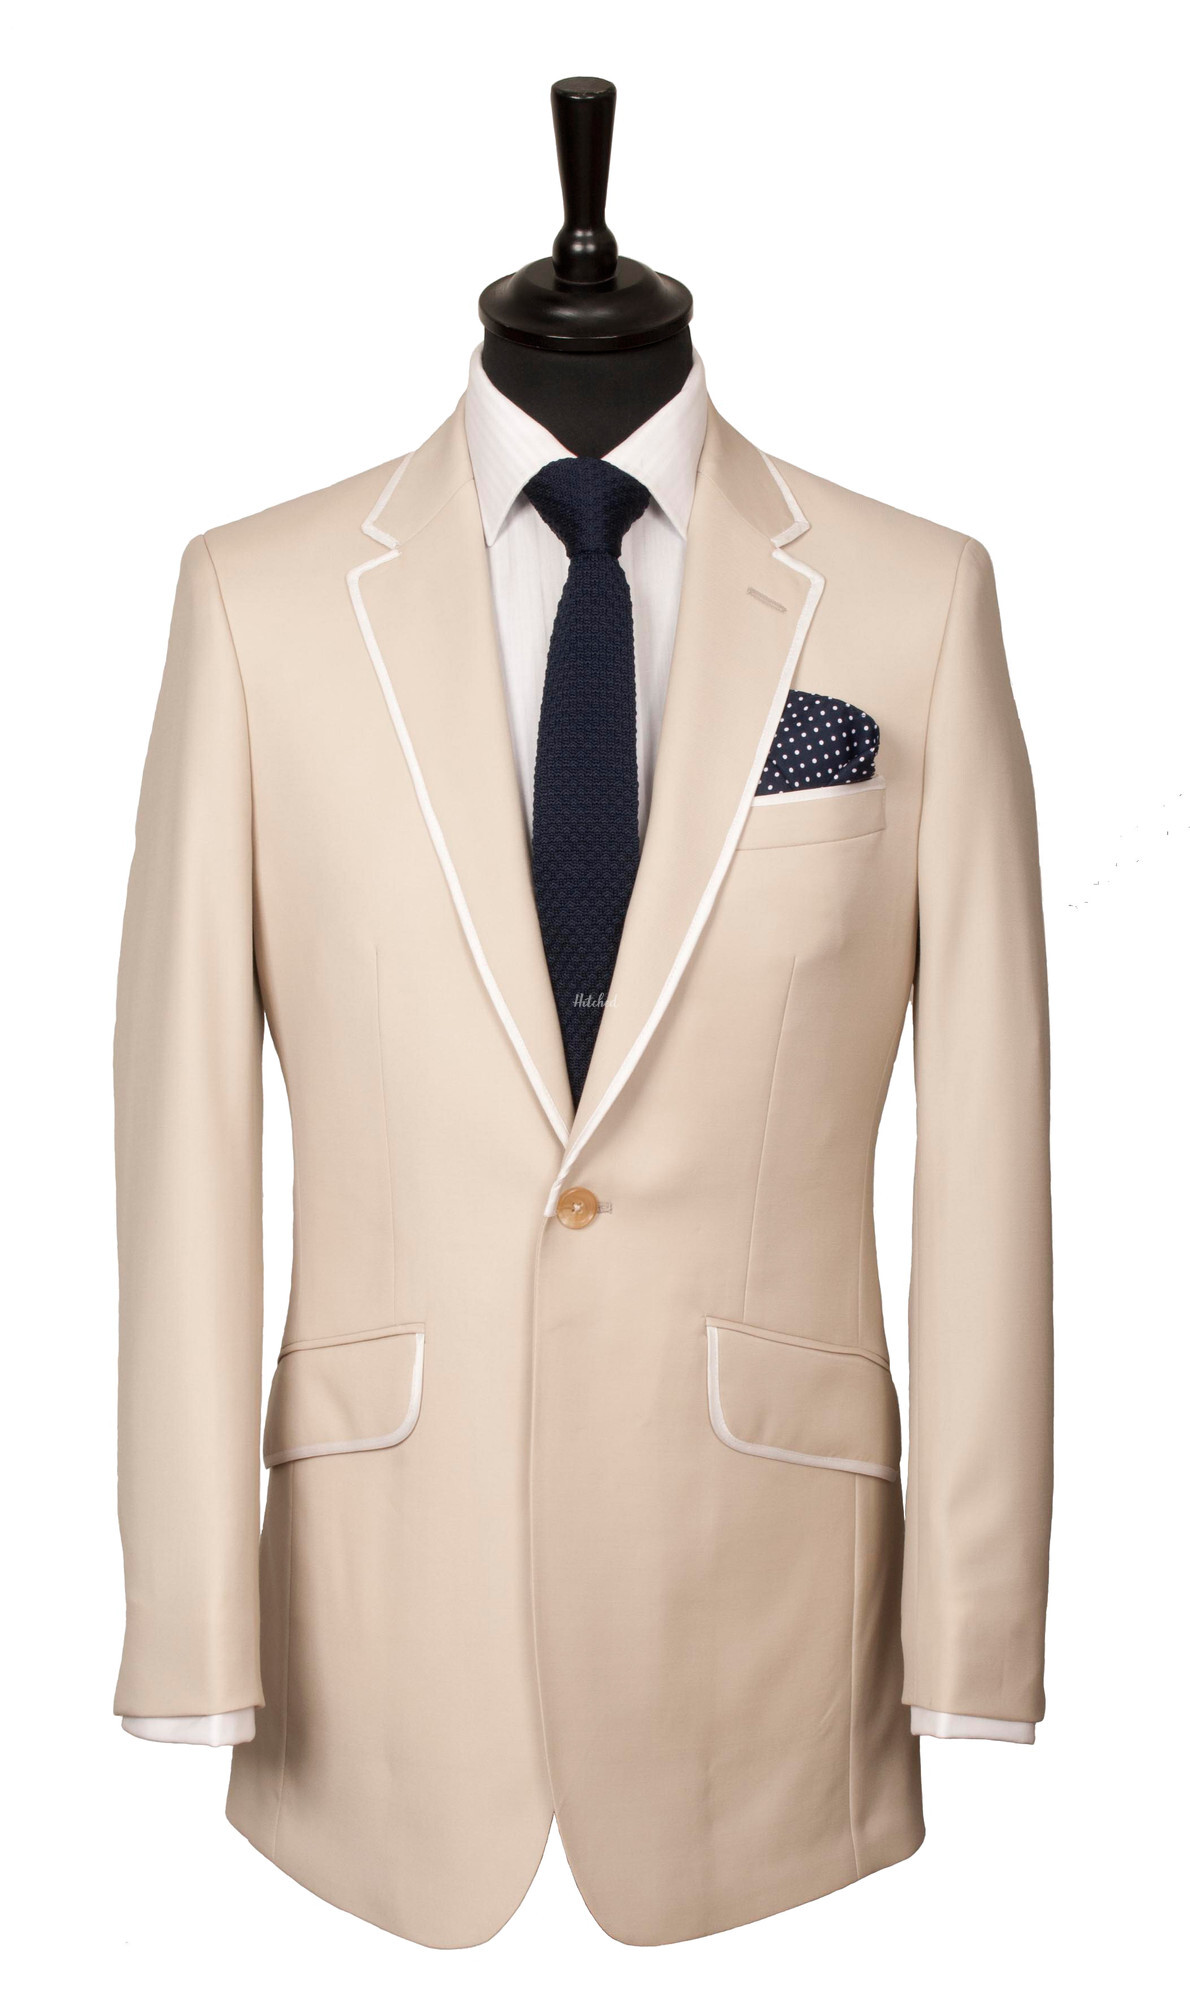 Beige Boating Mens Wedding Suit from King & Allen - hitched.co.uk